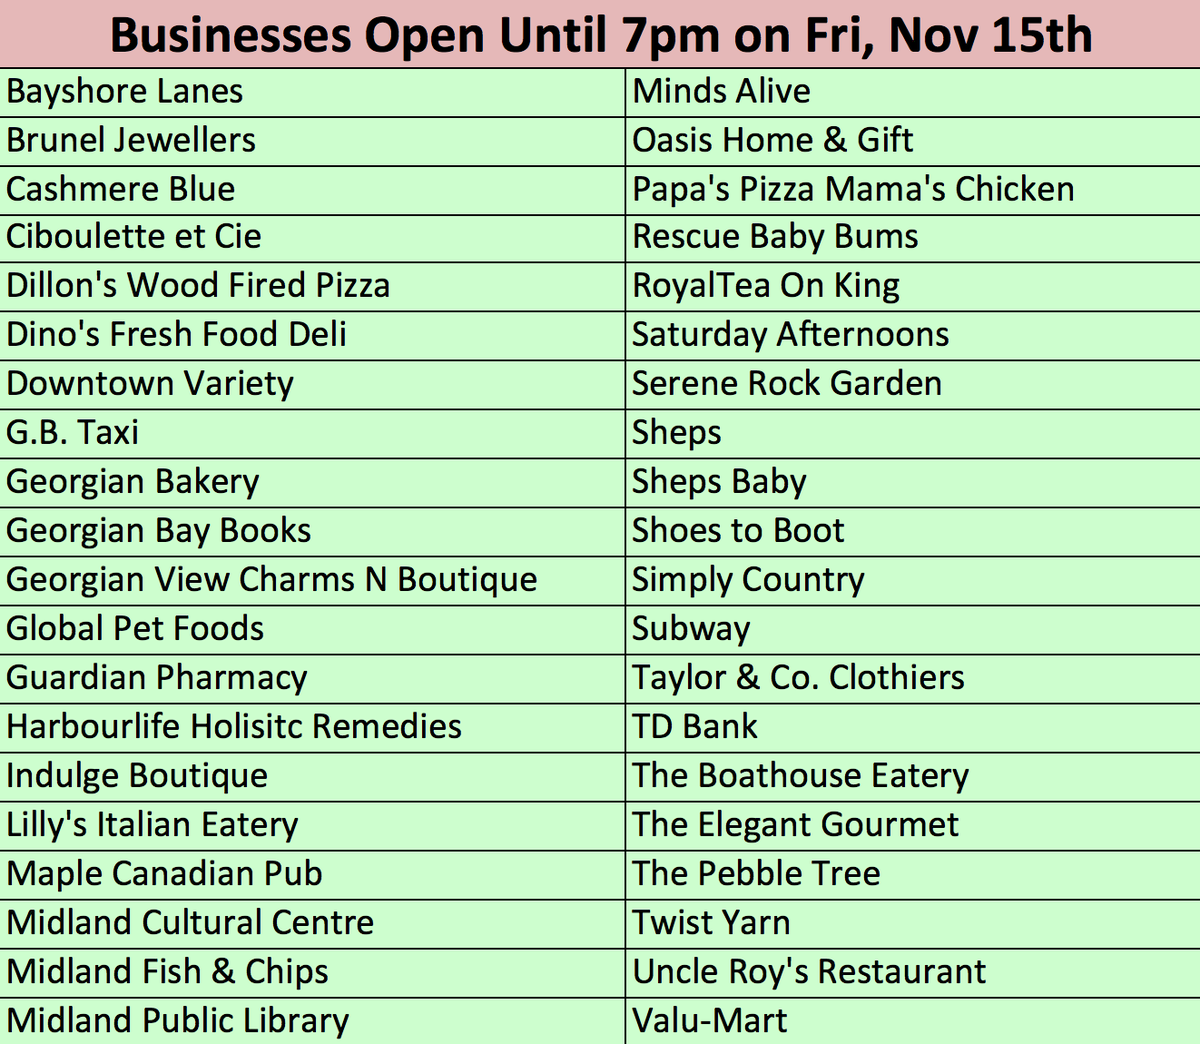 So many businesses are open late tomorrow night! * list subject to change *

Midland Tree Lighting Extravaganza!: facebook.com/events/3699885…
Grand Holiday Event: downtownmidland.ca/grandholidayev…

#OpenLate #GrandHolidayEvent2019 #MidlandTreeLighting #DowntownMidlandON